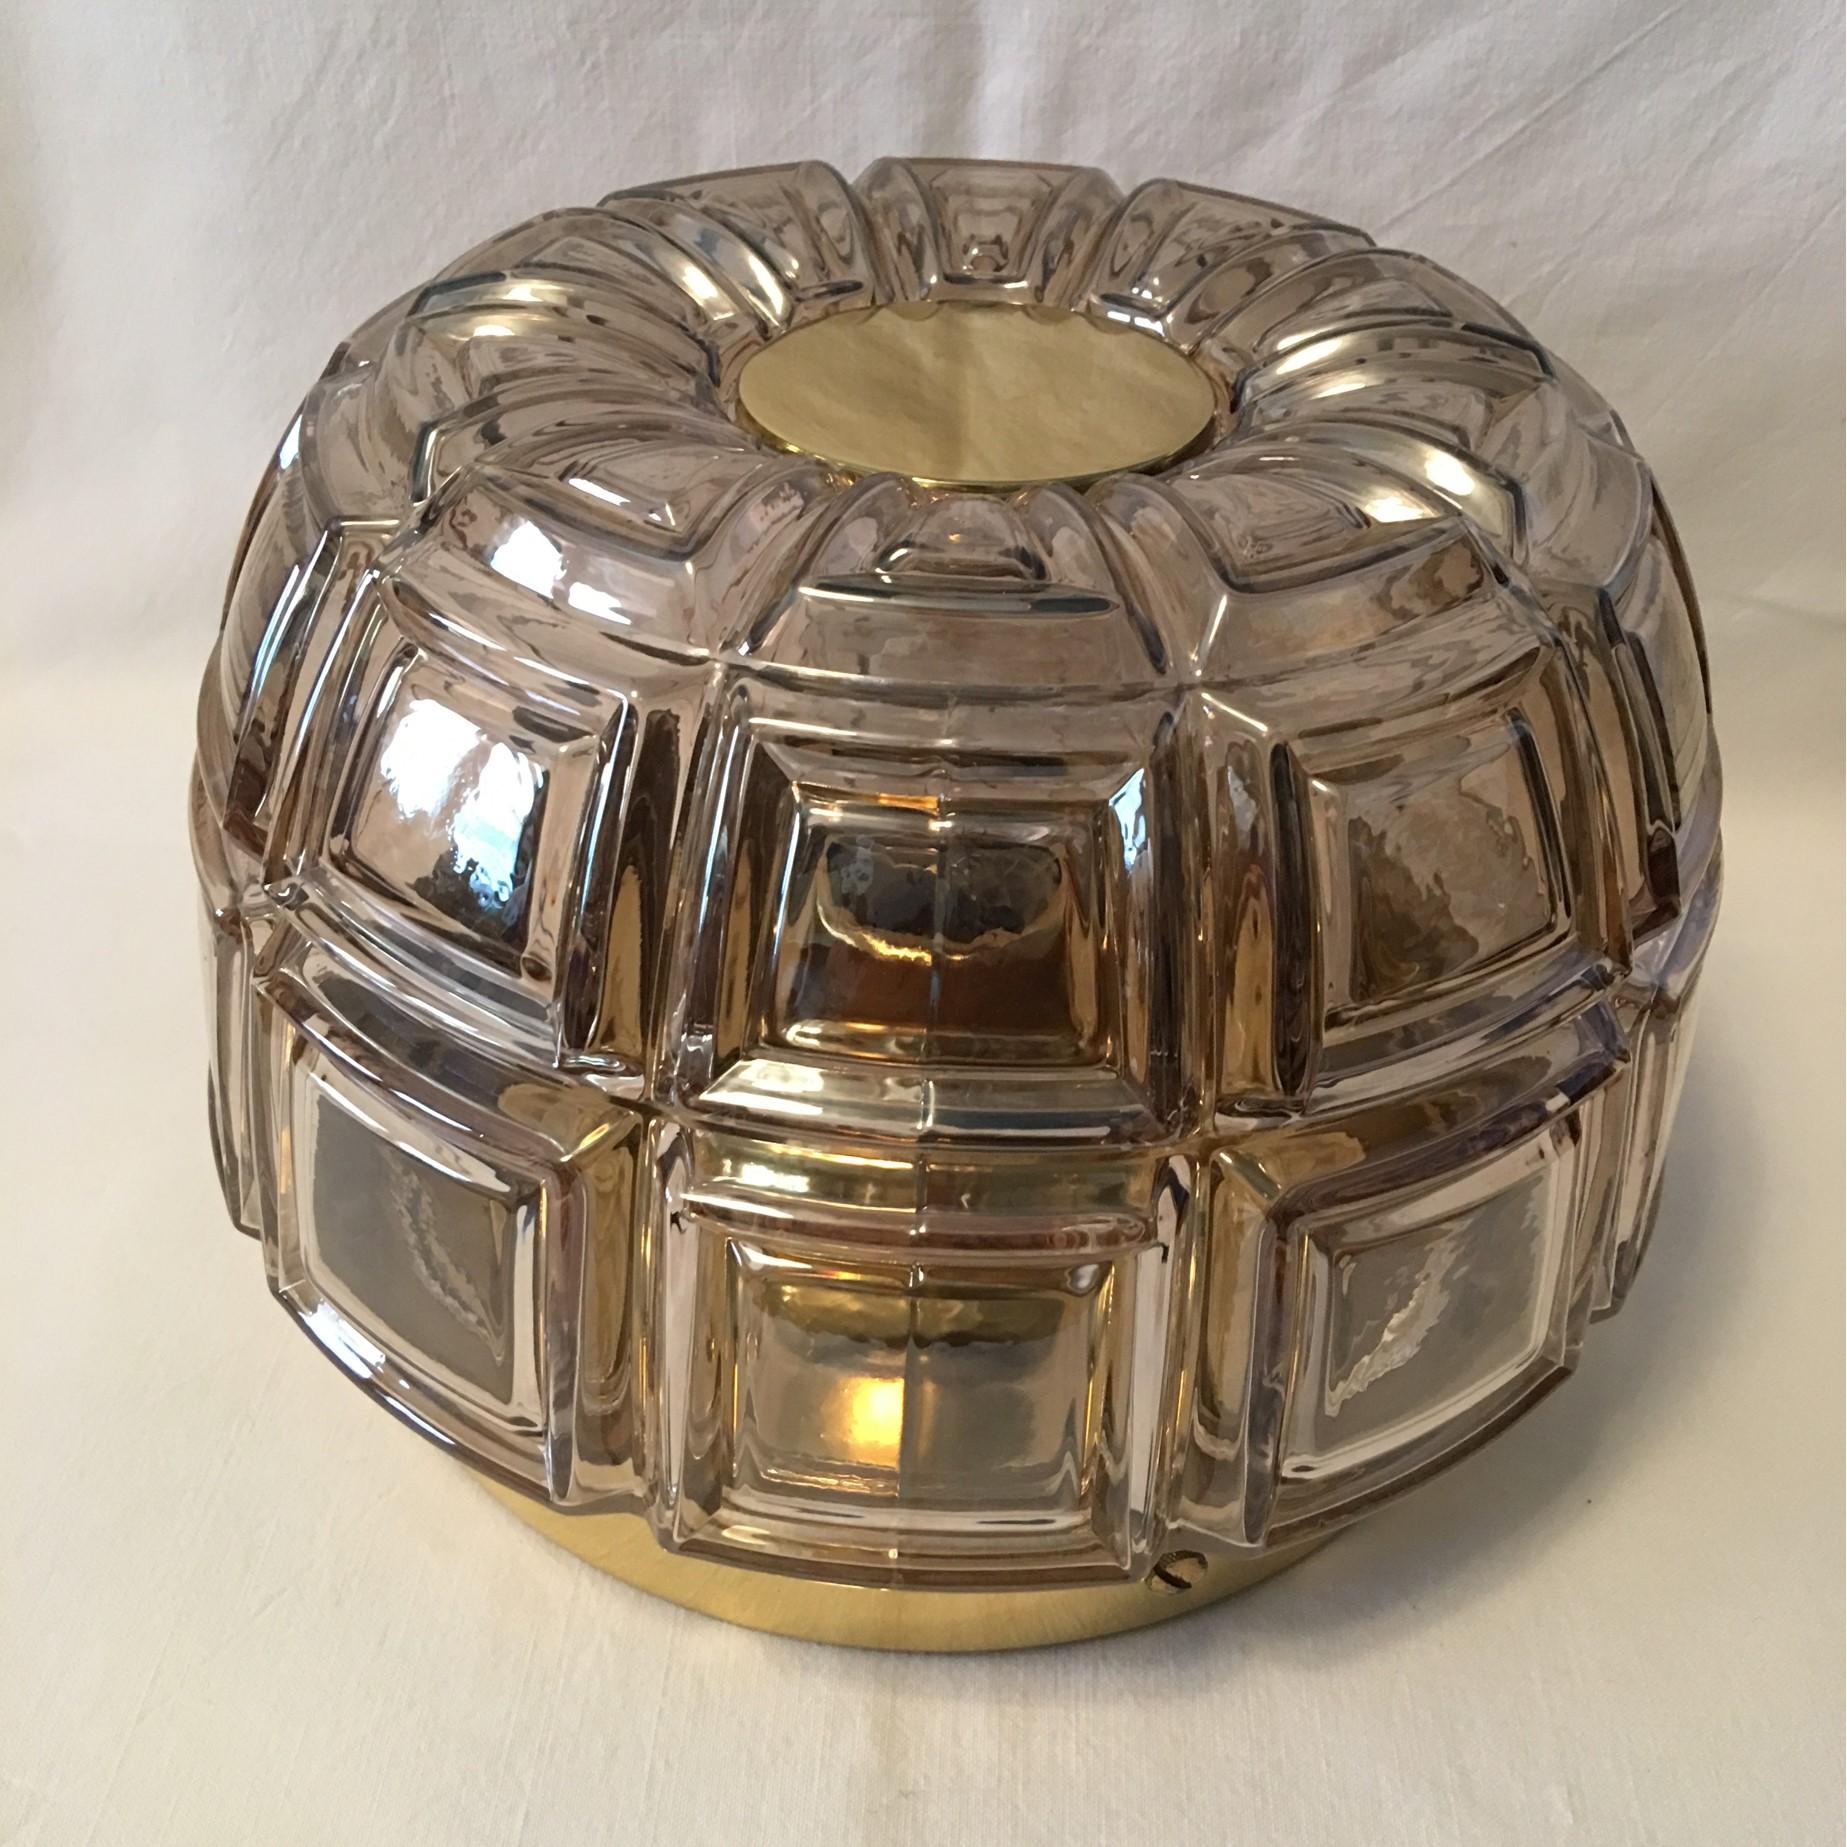 A great lighting effect created by this Geometric Textured glass flush mount or wall lamp from Glasshuette Limburg . It requires a European E 26 / 27 Edison Bulb up to 75 Watts. Rewired to meet U.S. standards. Lovely item.